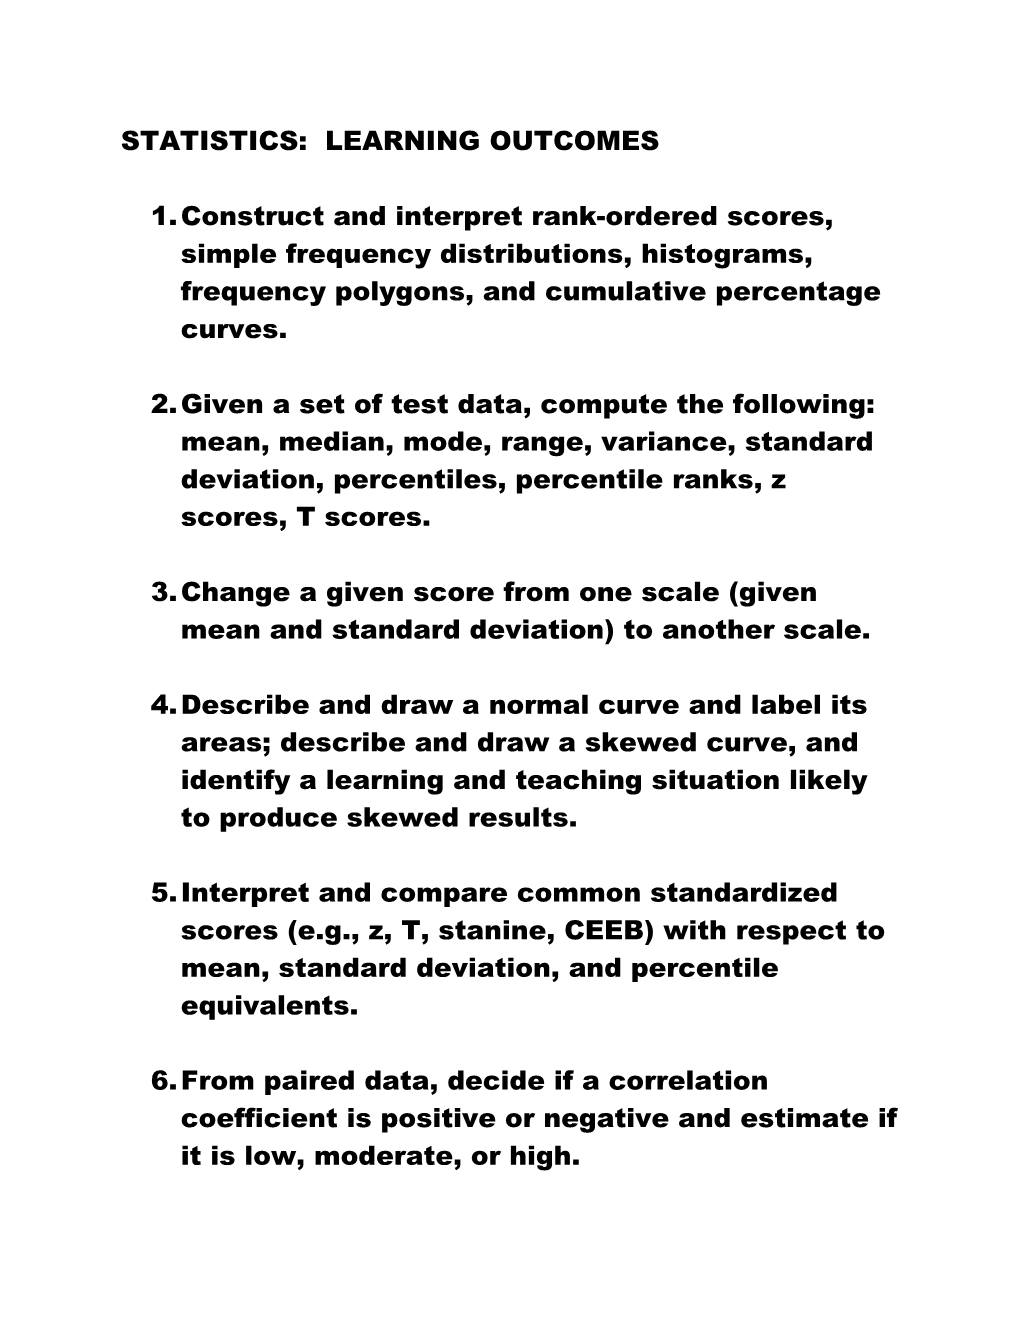 Statistics: Learning Outcomes